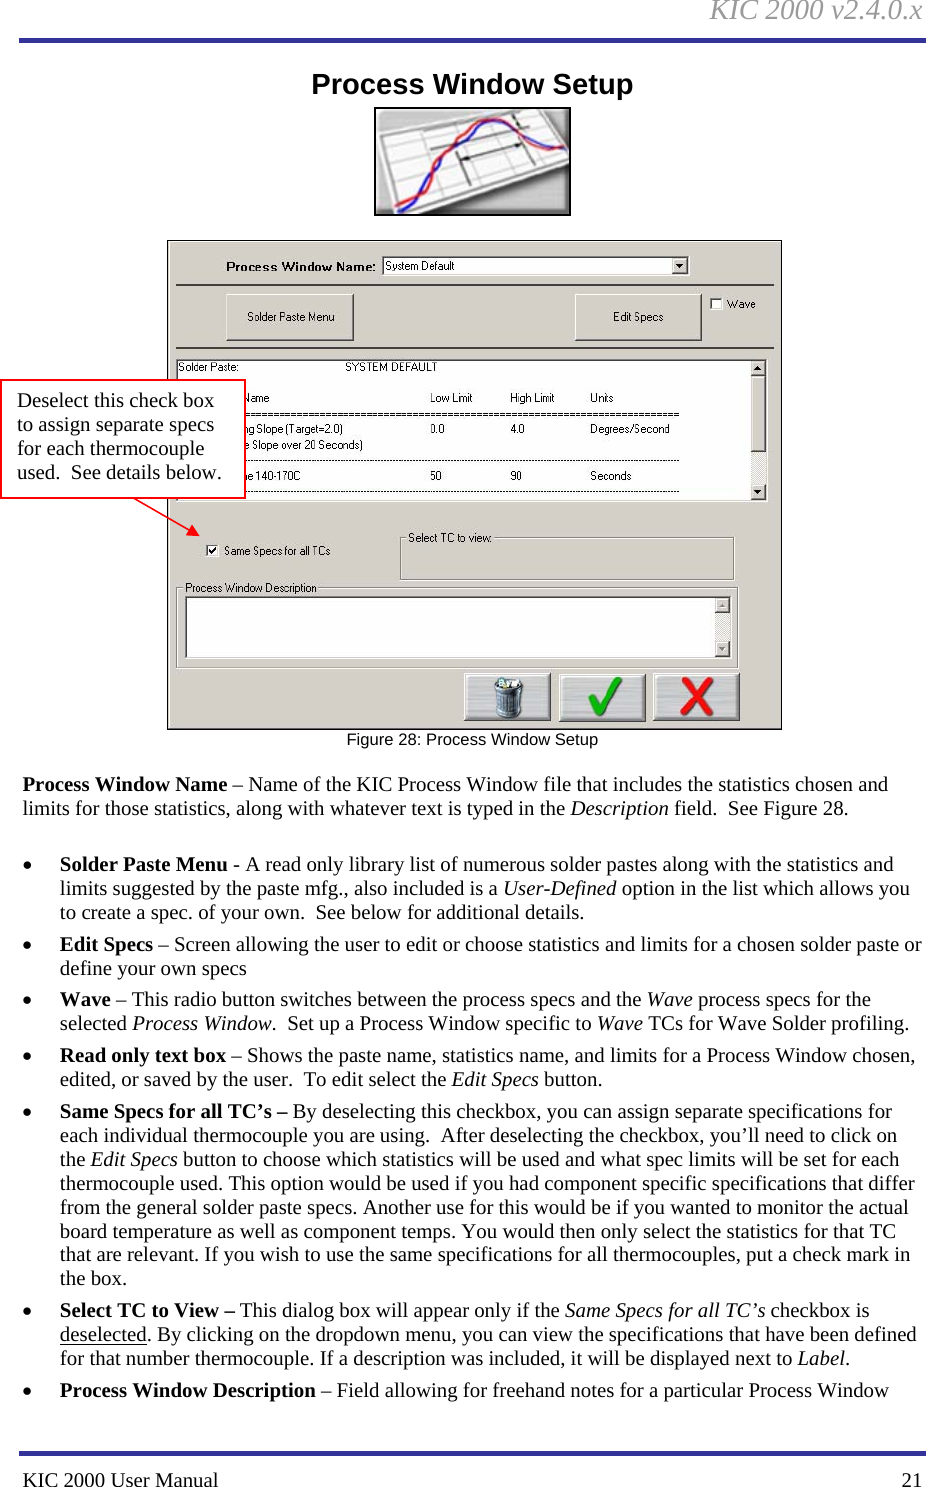 KIC 2000 v2.4.0.x KIC 2000 User Manual    21 Process Window Setup      Figure 28: Process Window Setup  Process Window Name – Name of the KIC Process Window file that includes the statistics chosen and limits for those statistics, along with whatever text is typed in the Description field.  See Figure 28.    • Solder Paste Menu - A read only library list of numerous solder pastes along with the statistics and limits suggested by the paste mfg., also included is a User-Defined option in the list which allows you to create a spec. of your own.  See below for additional details. • Edit Specs – Screen allowing the user to edit or choose statistics and limits for a chosen solder paste or define your own specs • Wave – This radio button switches between the process specs and the Wave process specs for the selected Process Window.  Set up a Process Window specific to Wave TCs for Wave Solder profiling.   • Read only text box – Shows the paste name, statistics name, and limits for a Process Window chosen, edited, or saved by the user.  To edit select the Edit Specs button.   • Same Specs for all TC’s – By deselecting this checkbox, you can assign separate specifications for each individual thermocouple you are using.  After deselecting the checkbox, you’ll need to click on the Edit Specs button to choose which statistics will be used and what spec limits will be set for each thermocouple used. This option would be used if you had component specific specifications that differ from the general solder paste specs. Another use for this would be if you wanted to monitor the actual board temperature as well as component temps. You would then only select the statistics for that TC that are relevant. If you wish to use the same specifications for all thermocouples, put a check mark in the box. • Select TC to View – This dialog box will appear only if the Same Specs for all TC’s checkbox is deselected. By clicking on the dropdown menu, you can view the specifications that have been defined for that number thermocouple. If a description was included, it will be displayed next to Label.  • Process Window Description – Field allowing for freehand notes for a particular Process Window Deselect this check box to assign separate specs for each thermocouple used.  See details below. 